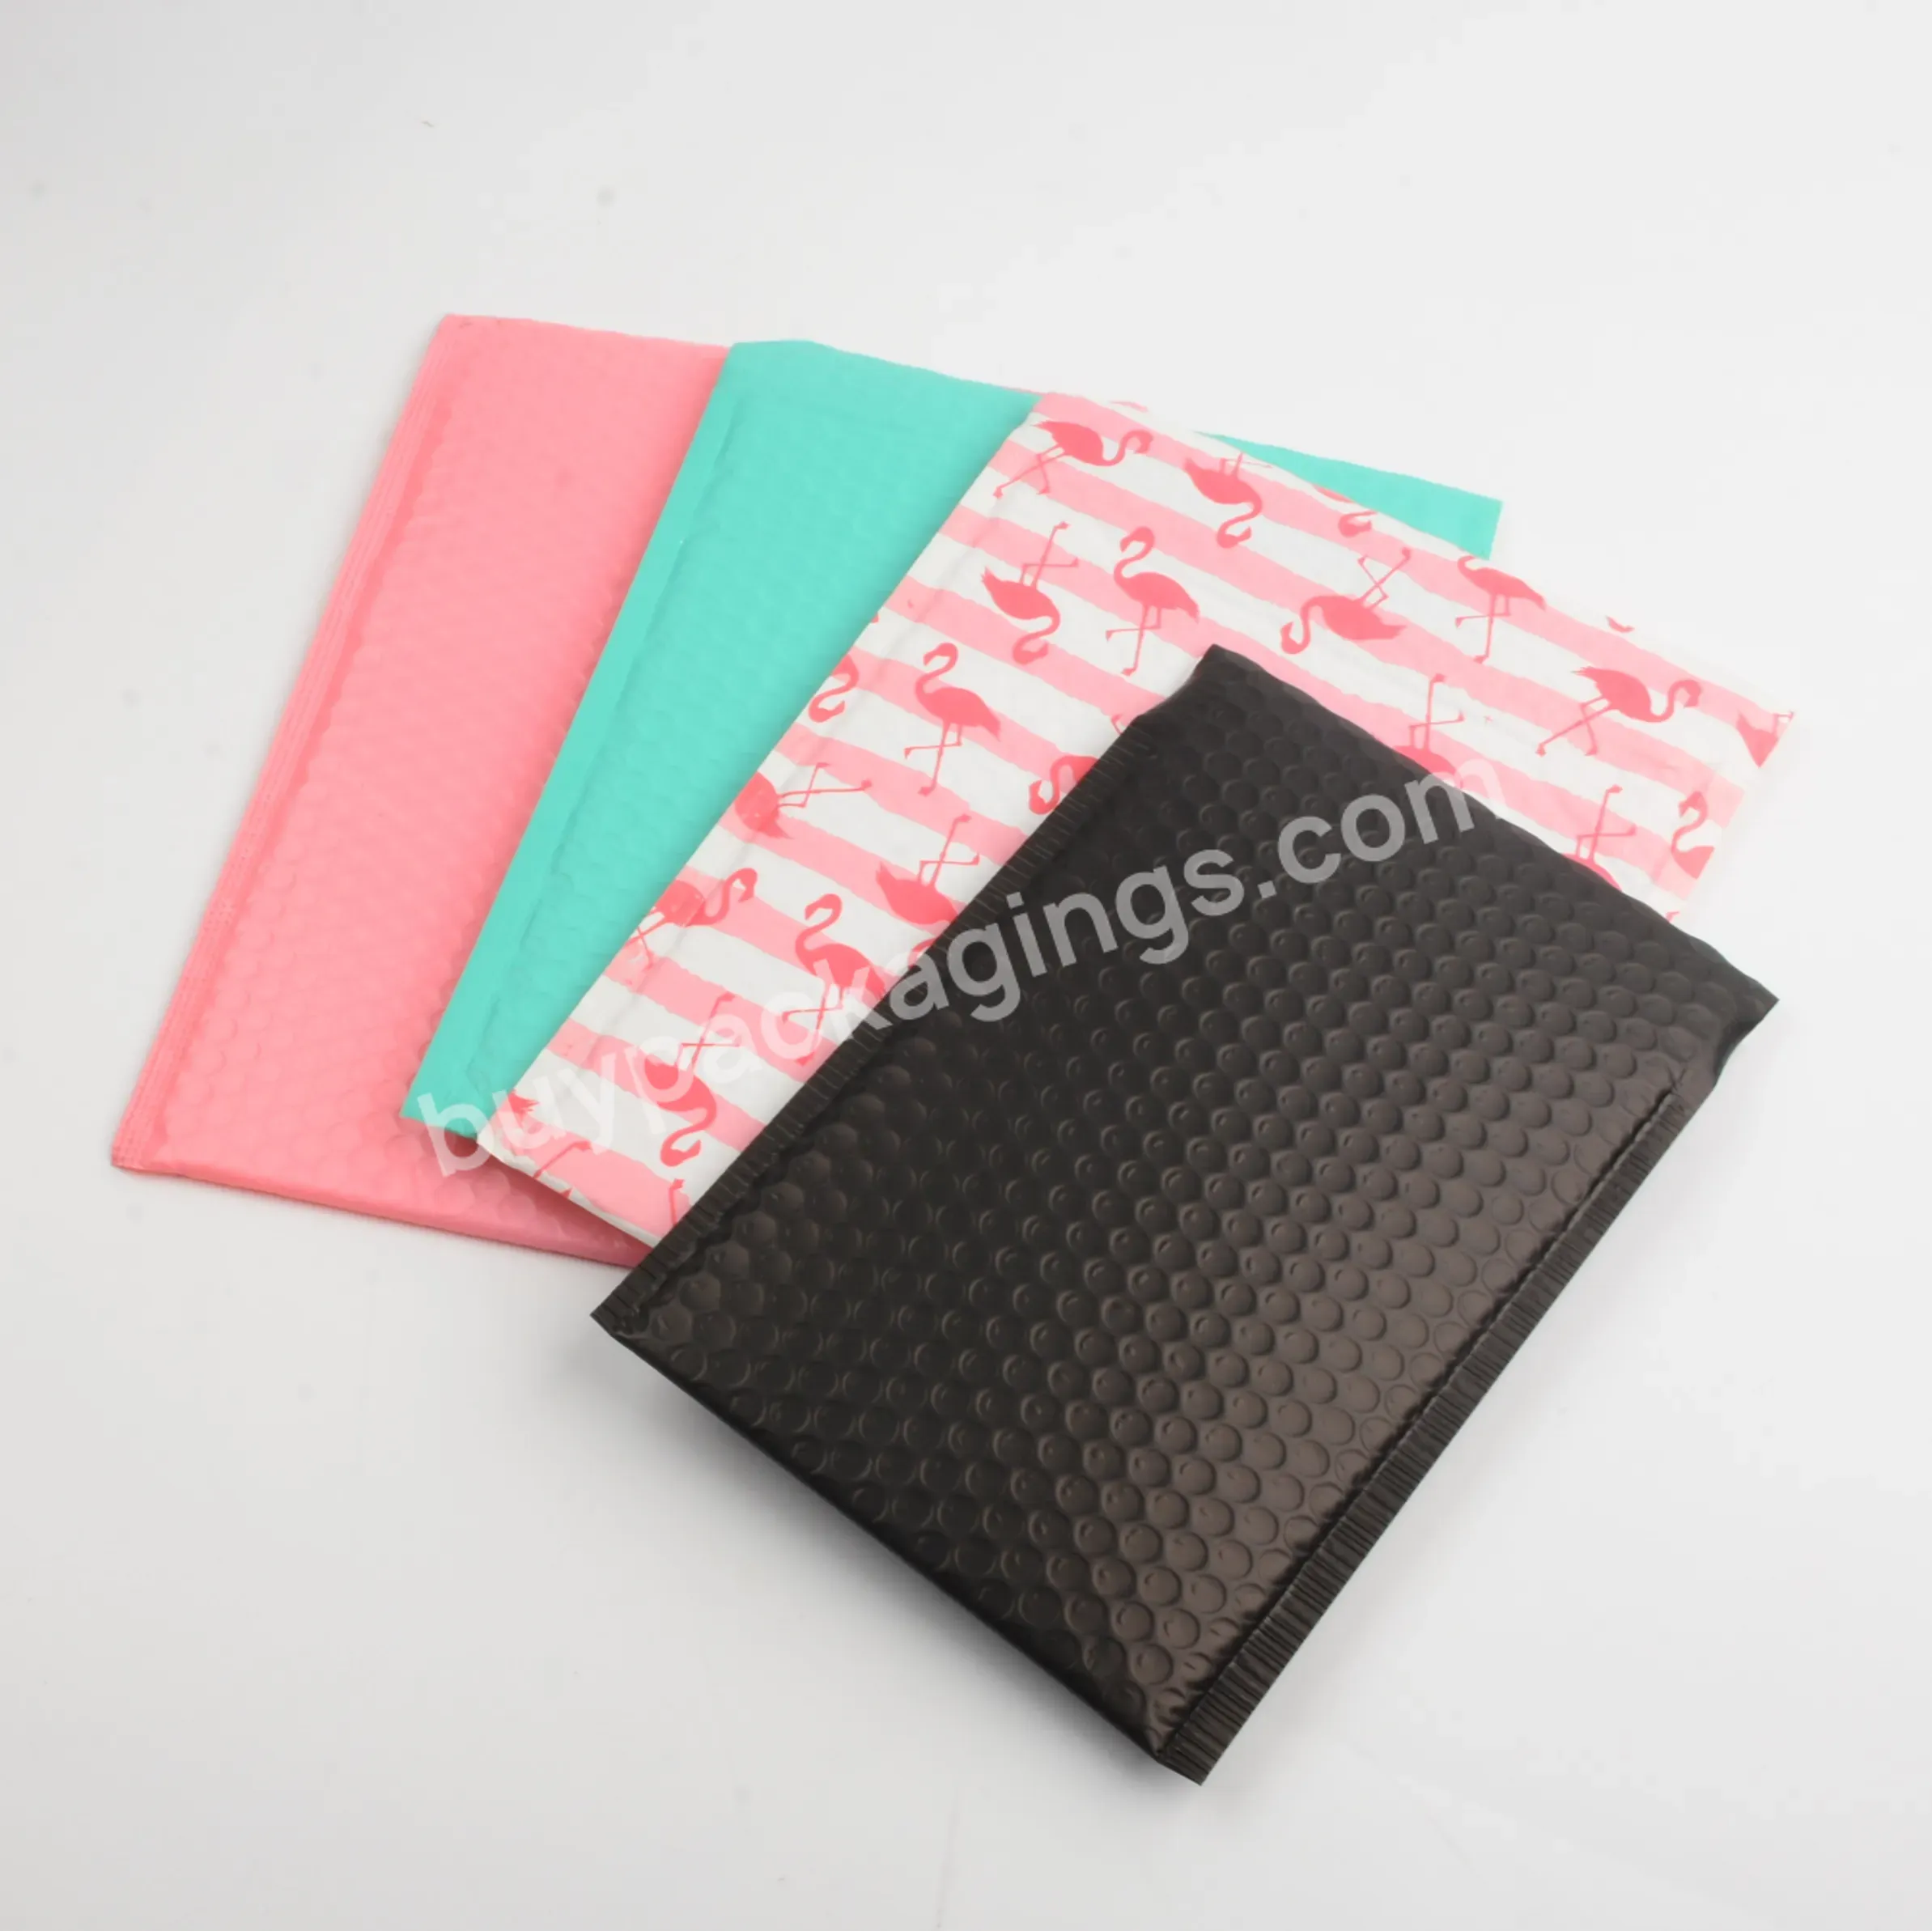 Customized Product Shipping Bags Pink Black Bubble Bags Printed Logo Shipping Bags - Buy Customized Product Shipping Bags,Pink Black Bubble Bags,Printed Logo Shipping Bags.